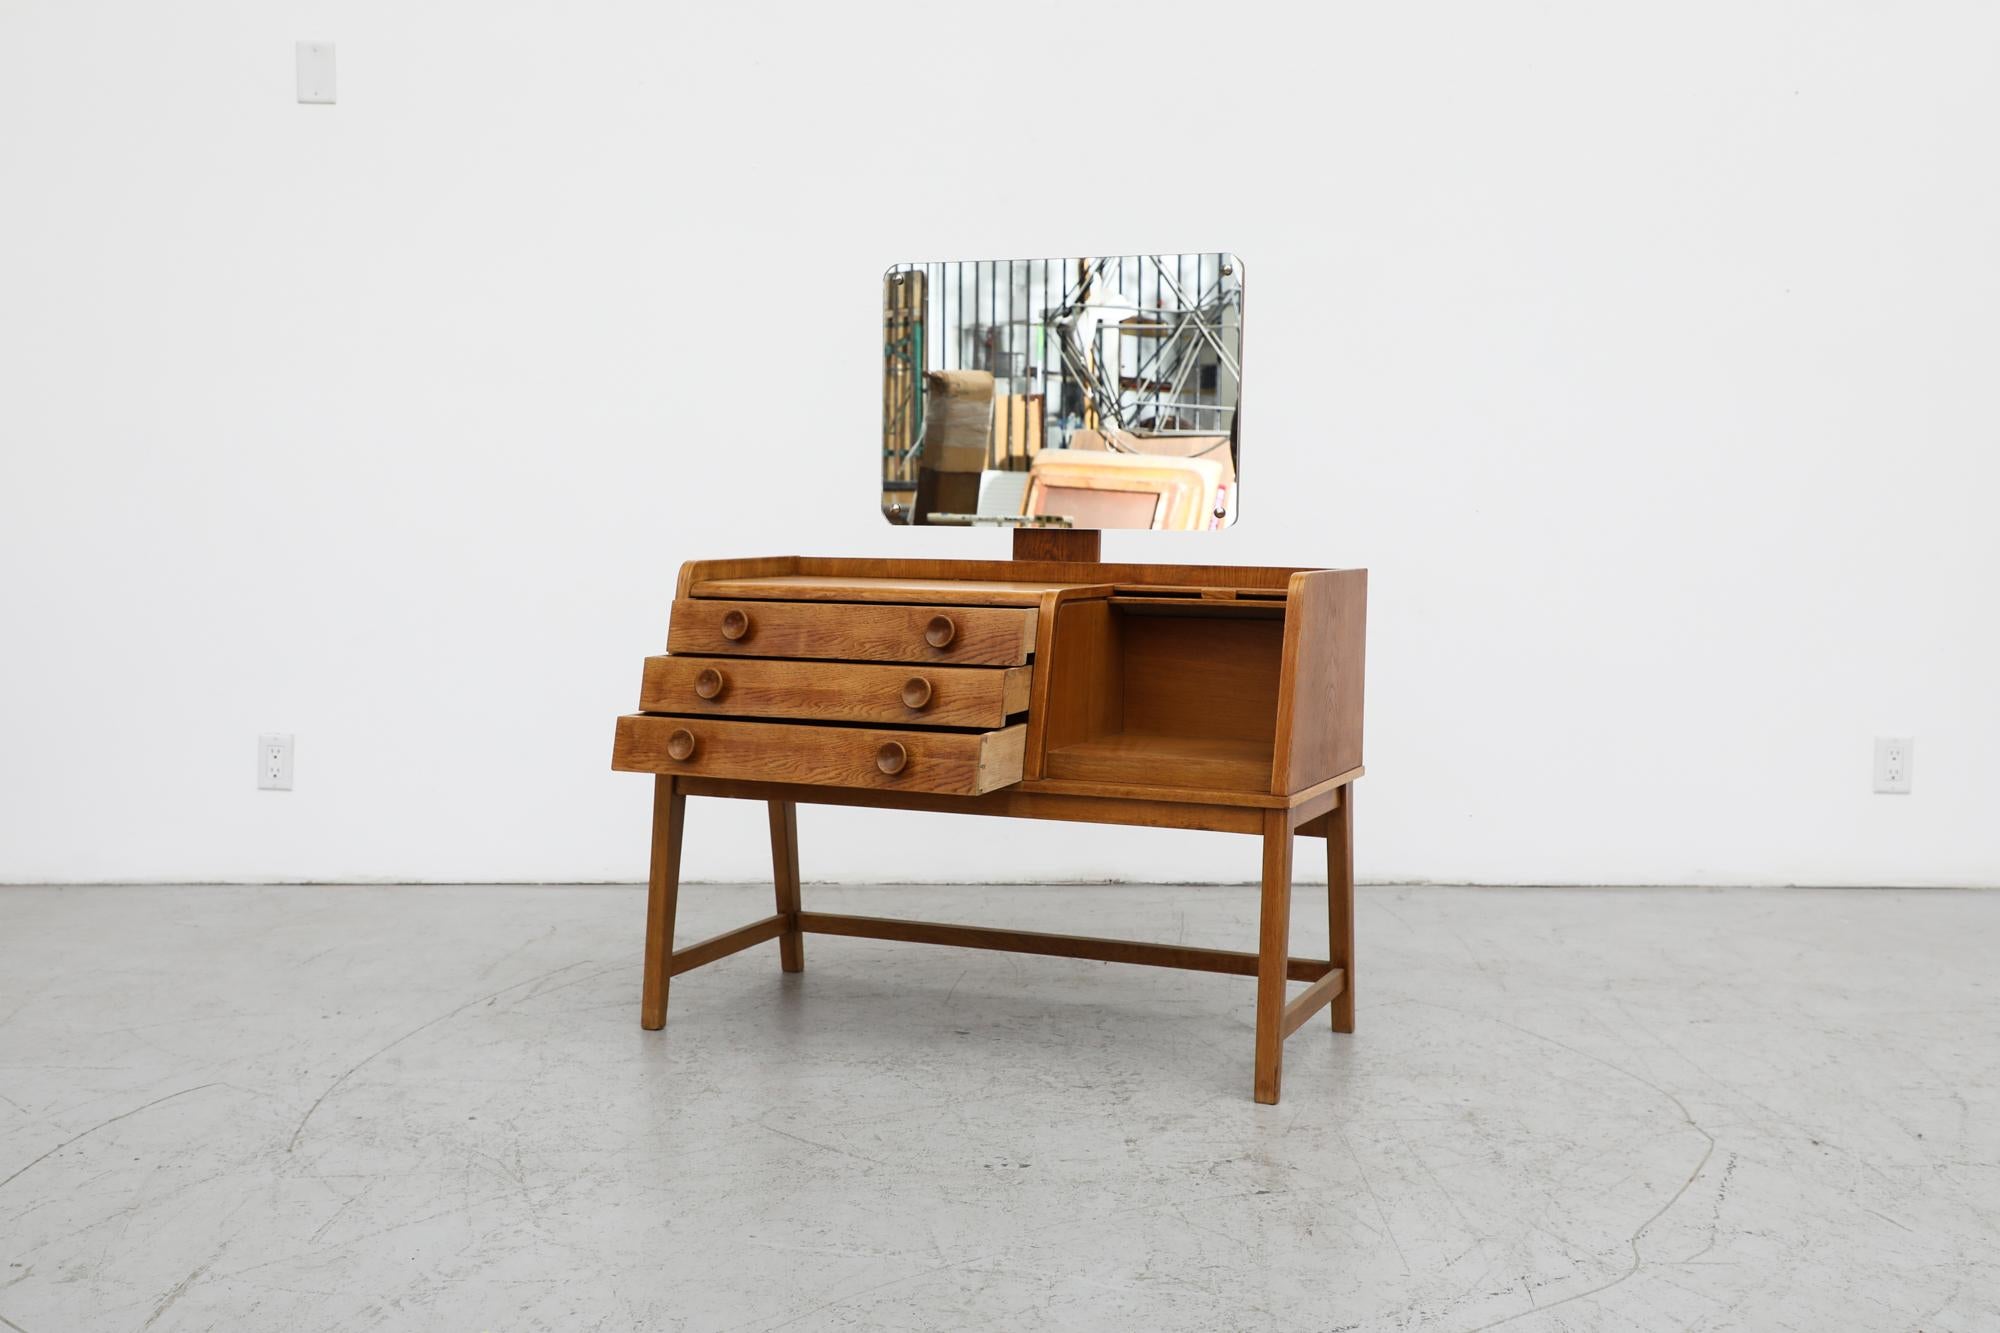 Mid-20th Century Mid-Century Oak Vanity with Tambour Door Cabinet, Drawers, and Rounded Mirror